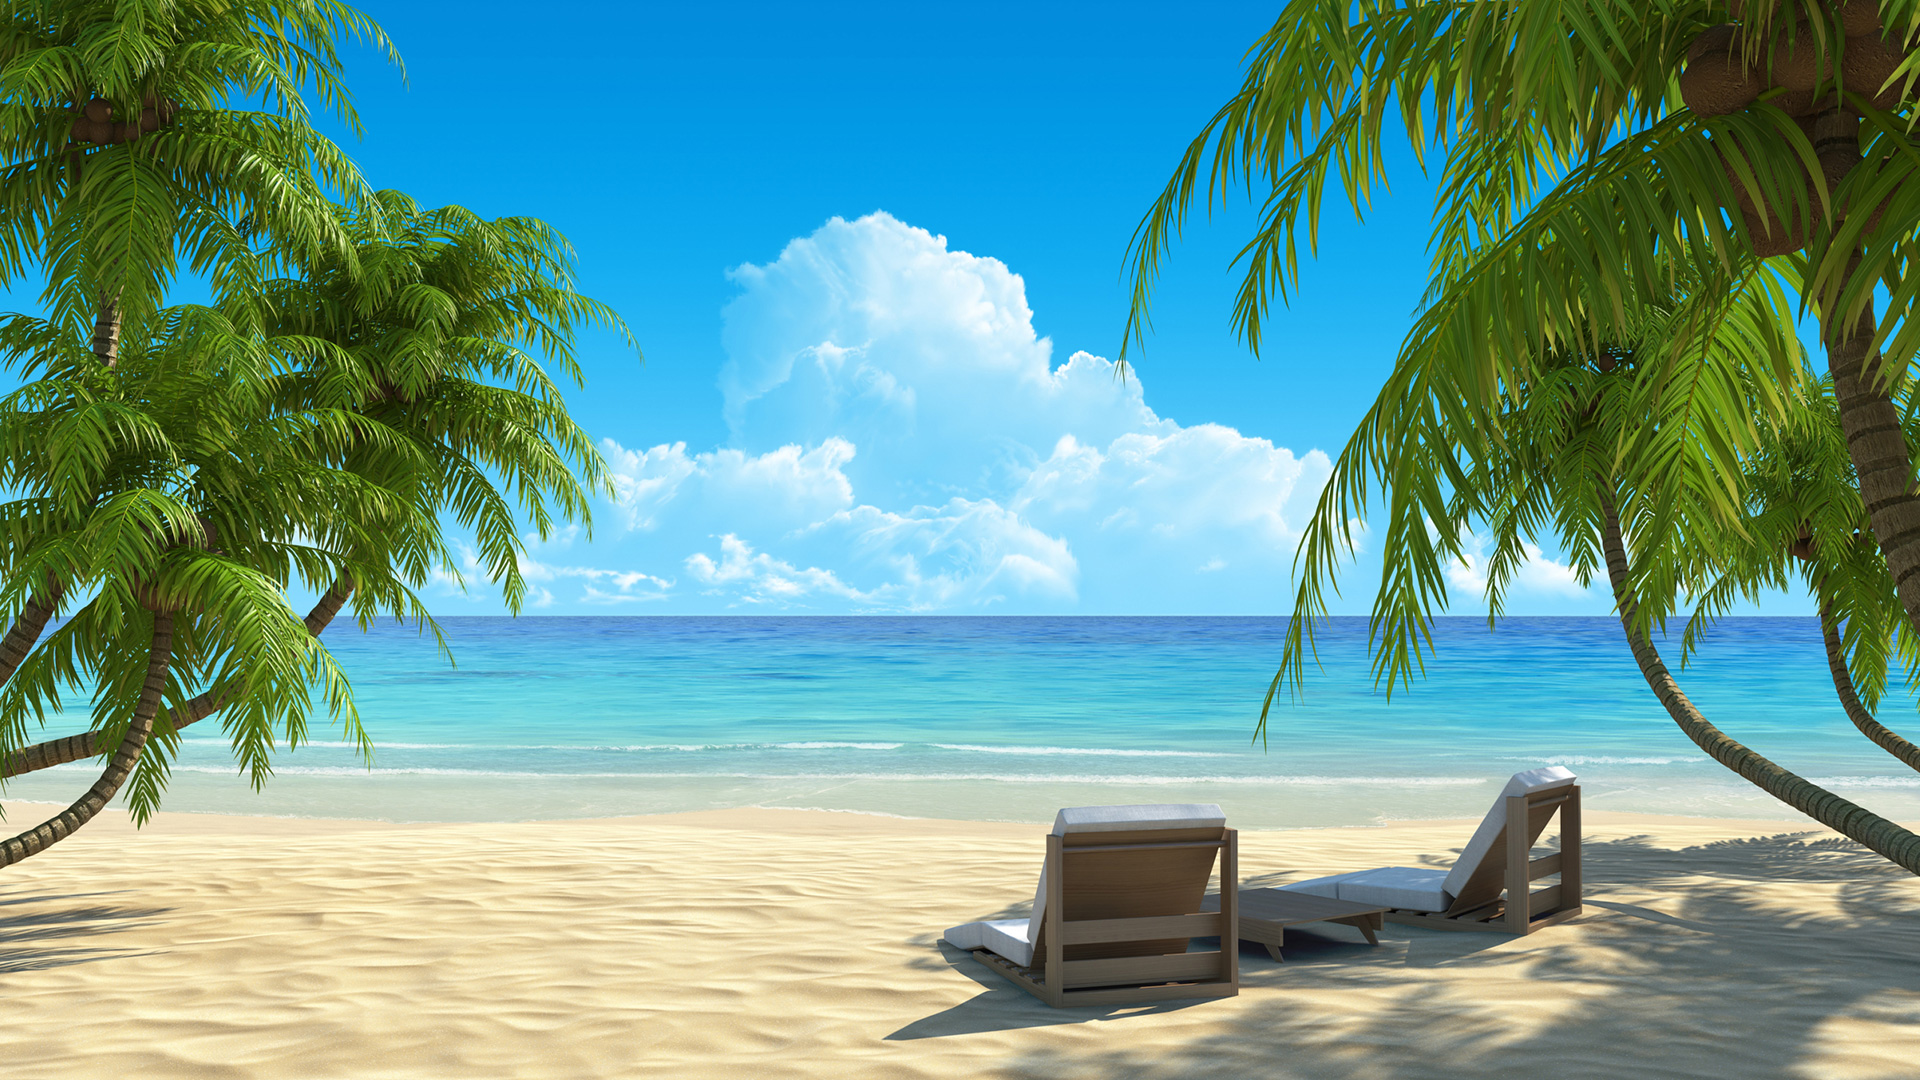 Paradise Beach HD Wallpapers - New WallpapersNew Wallpapers